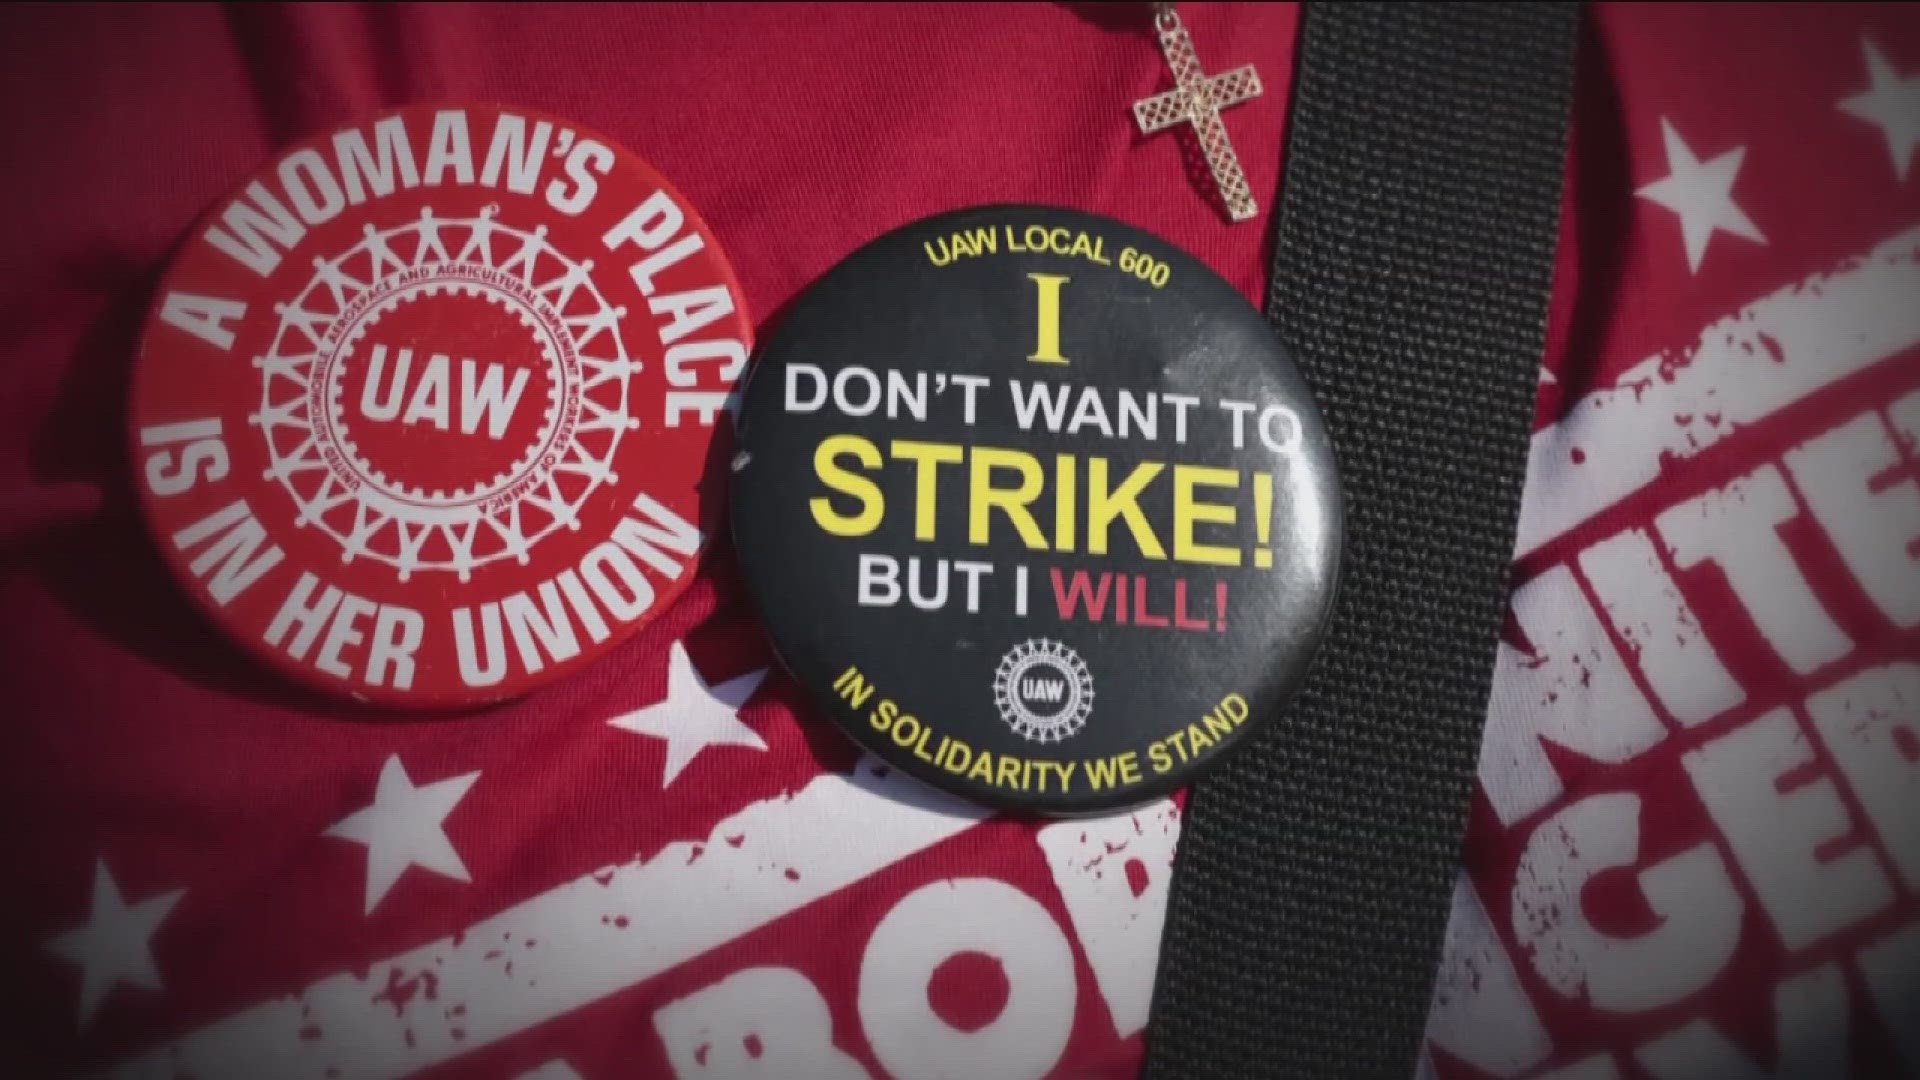 Striking workers said they want to secure full benefits and salaries for all workers.